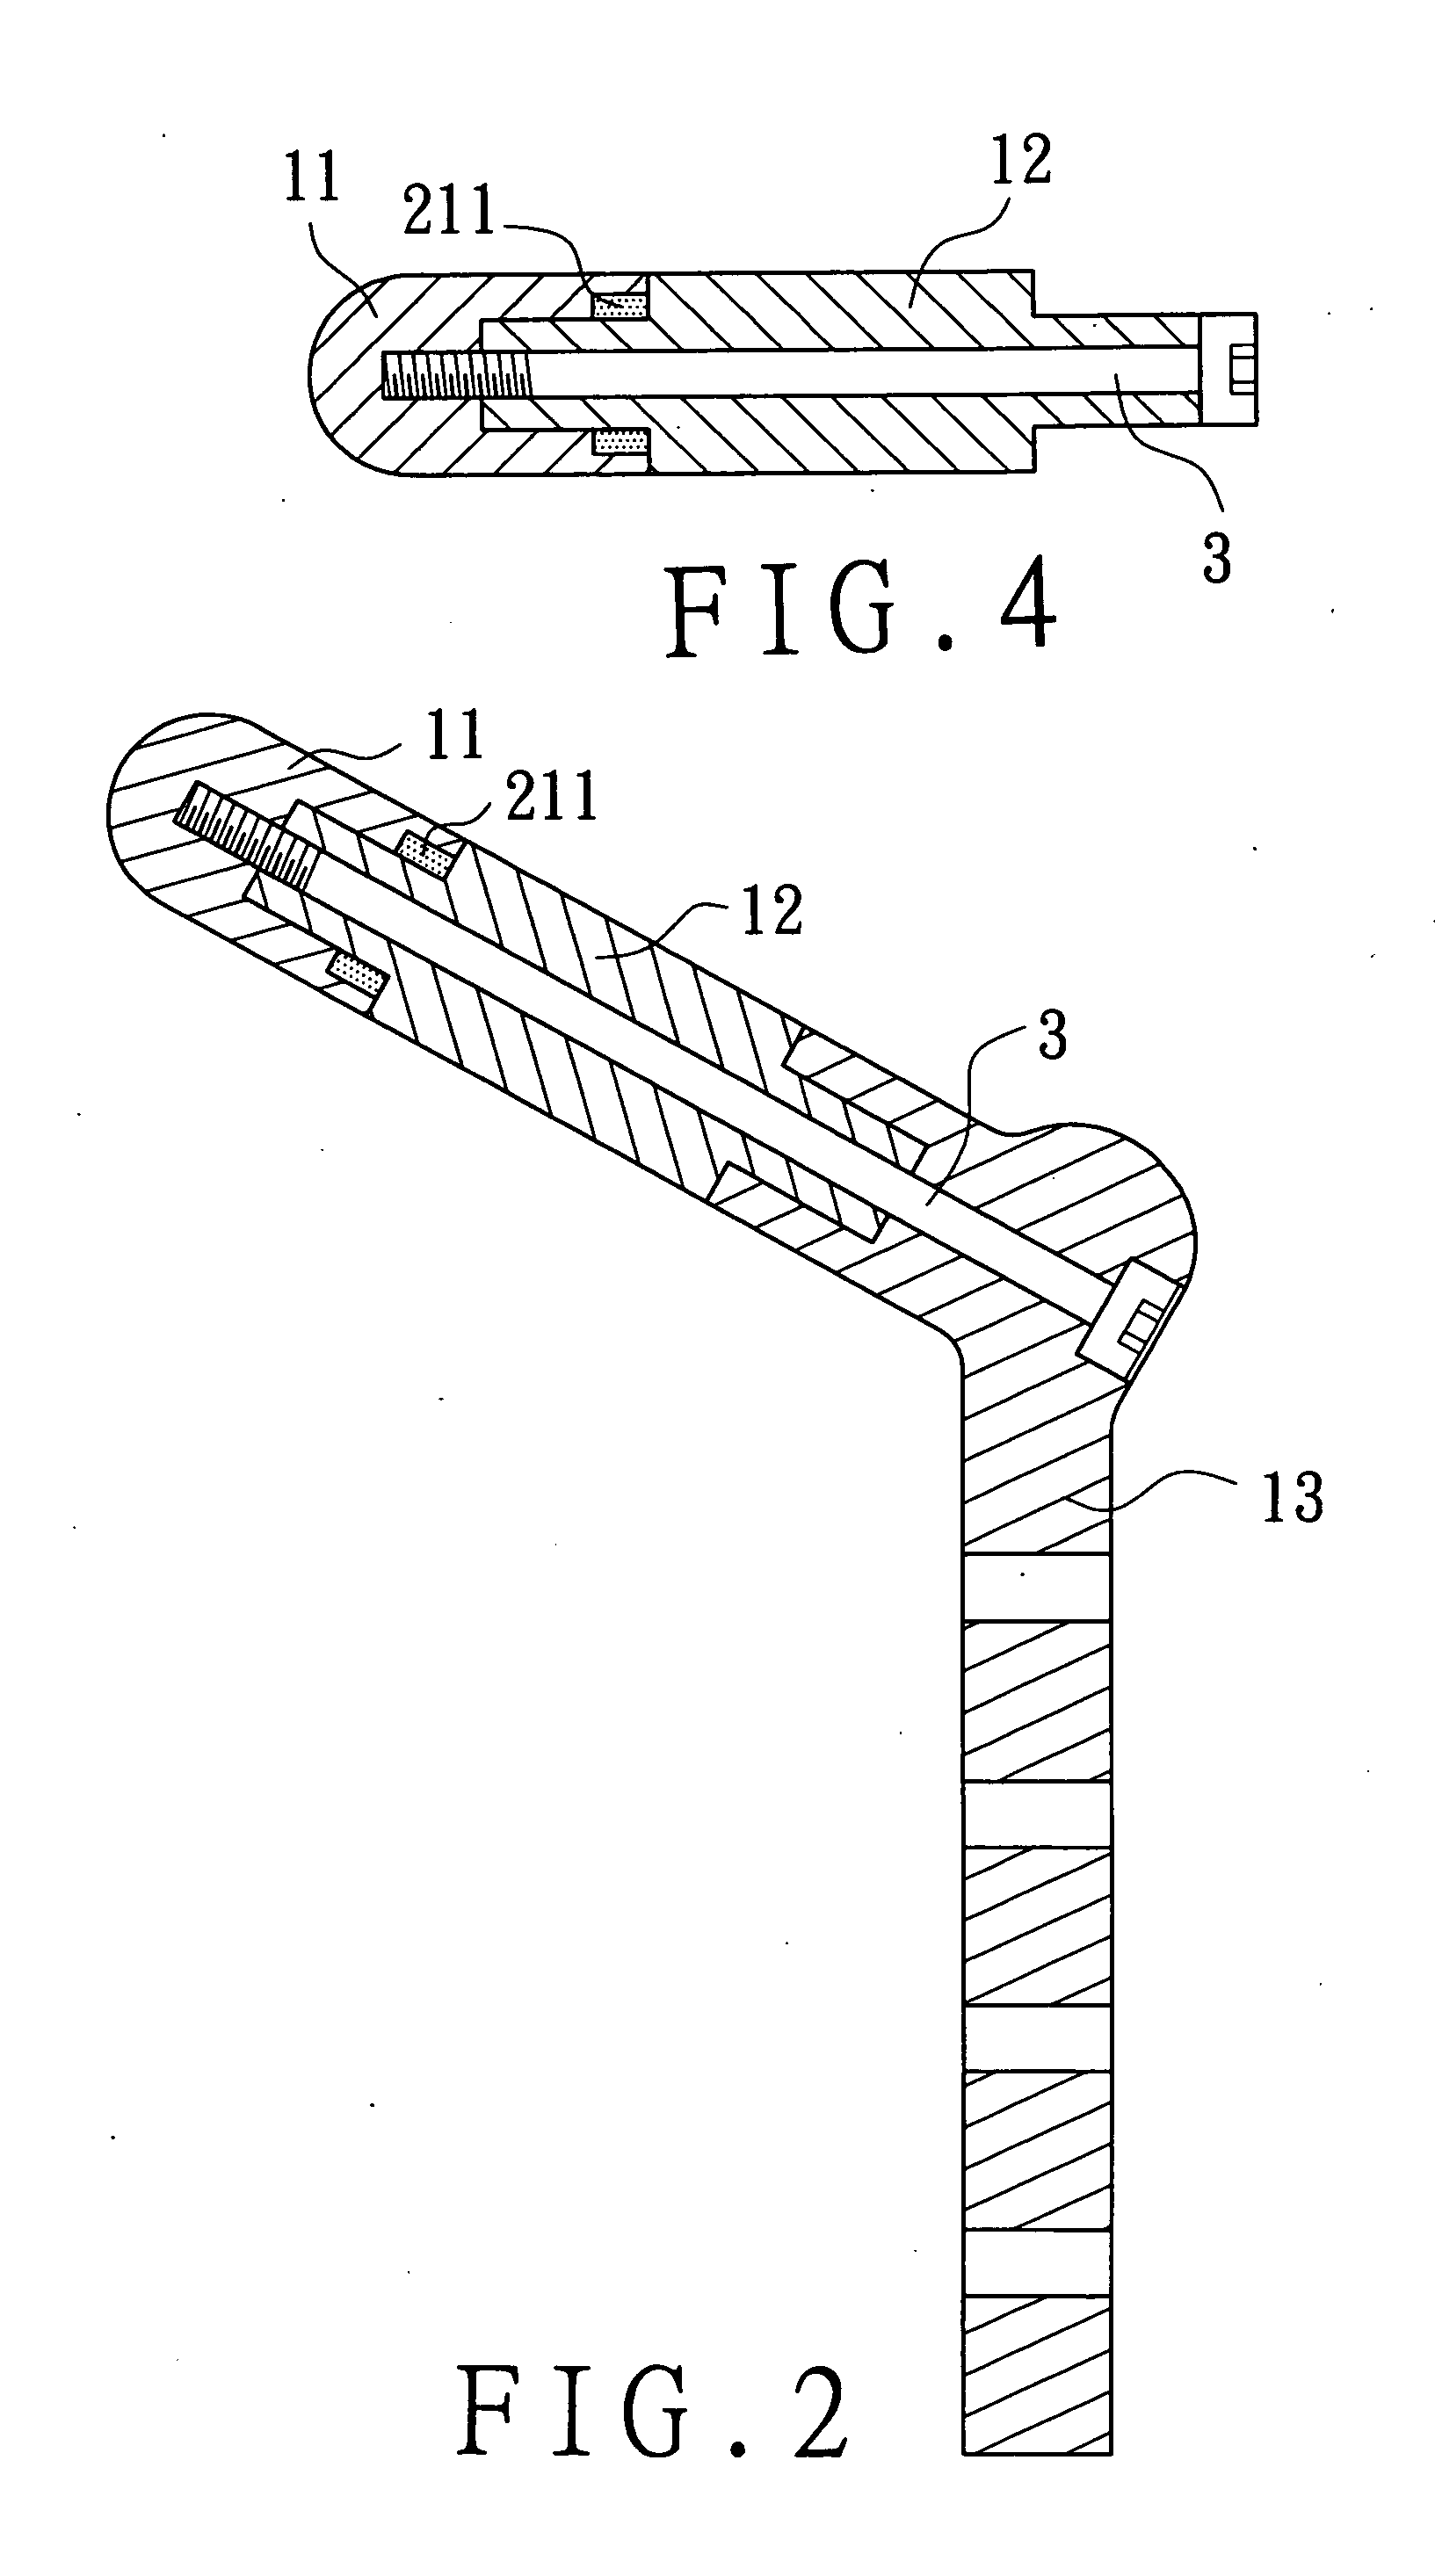 Femoral head and neck strengthening device